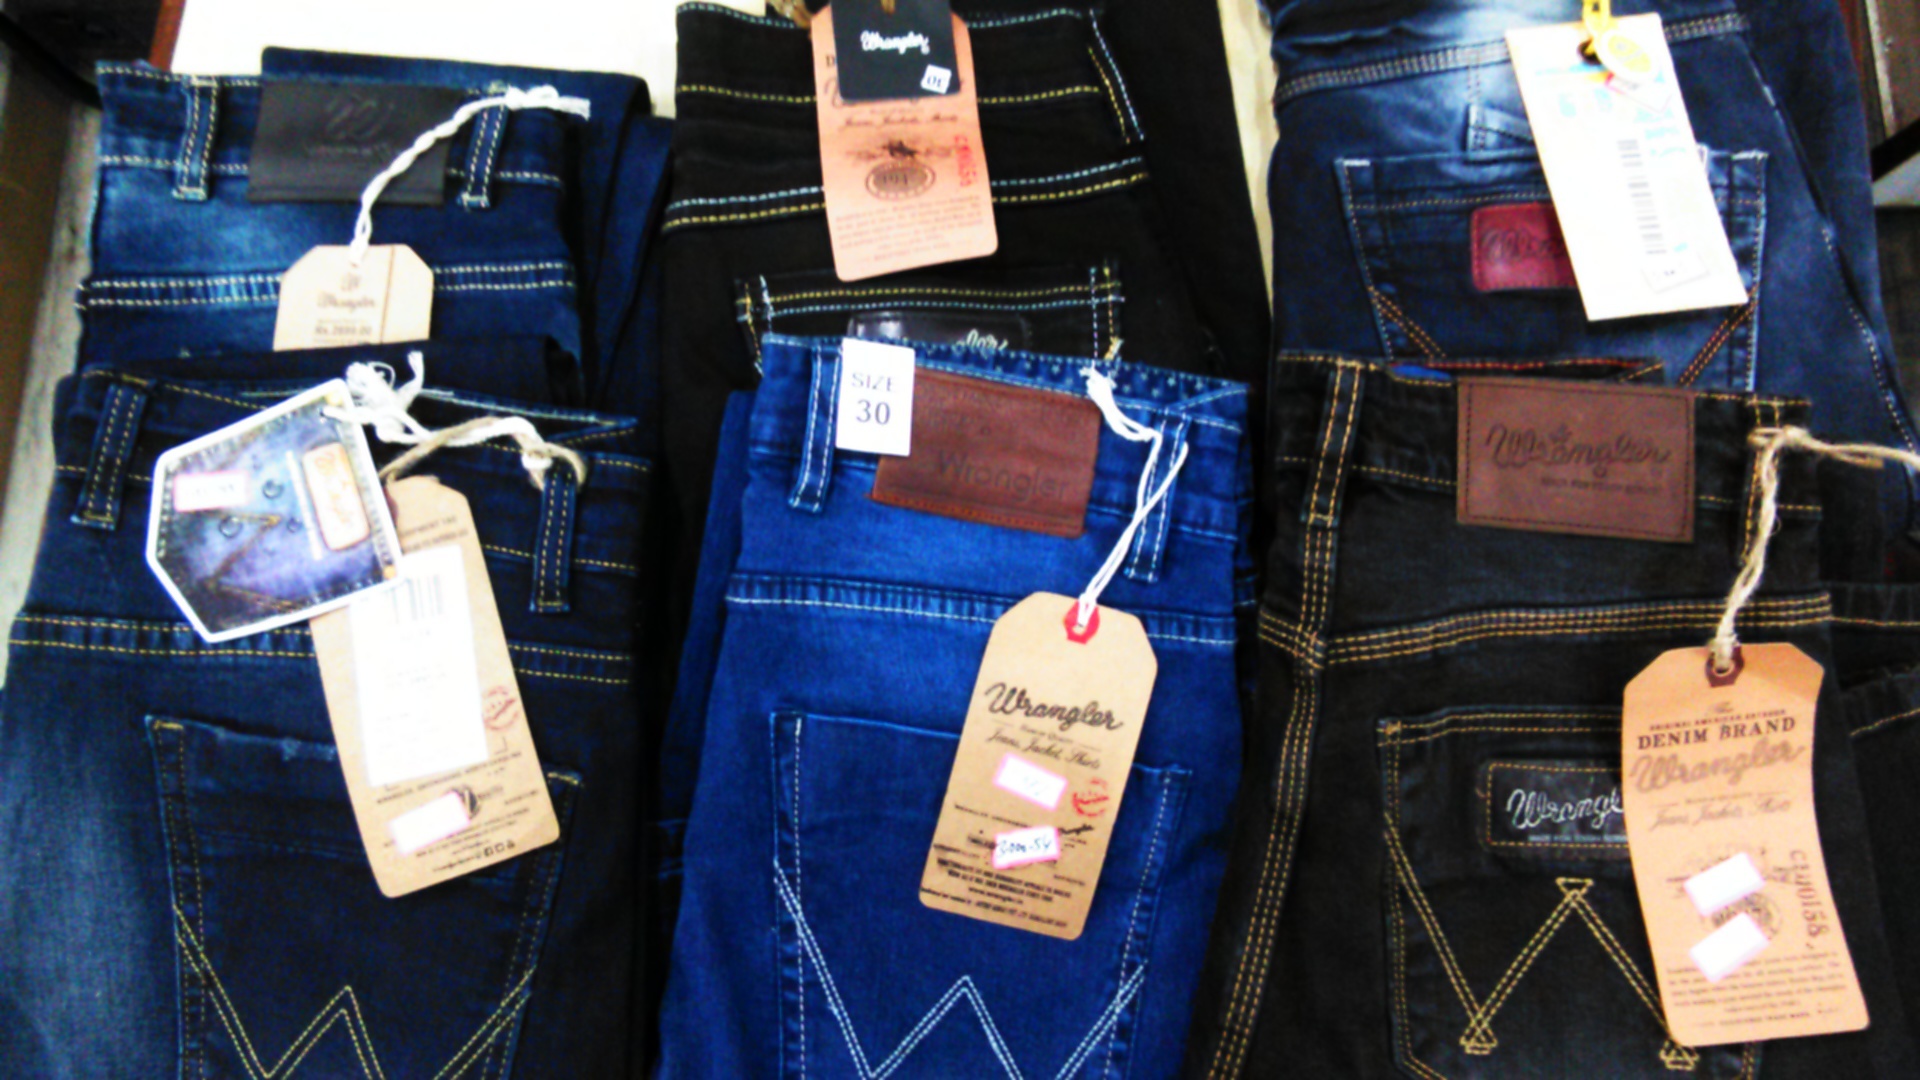 Branded Stretchable Denim Jeans with bill for resale in India